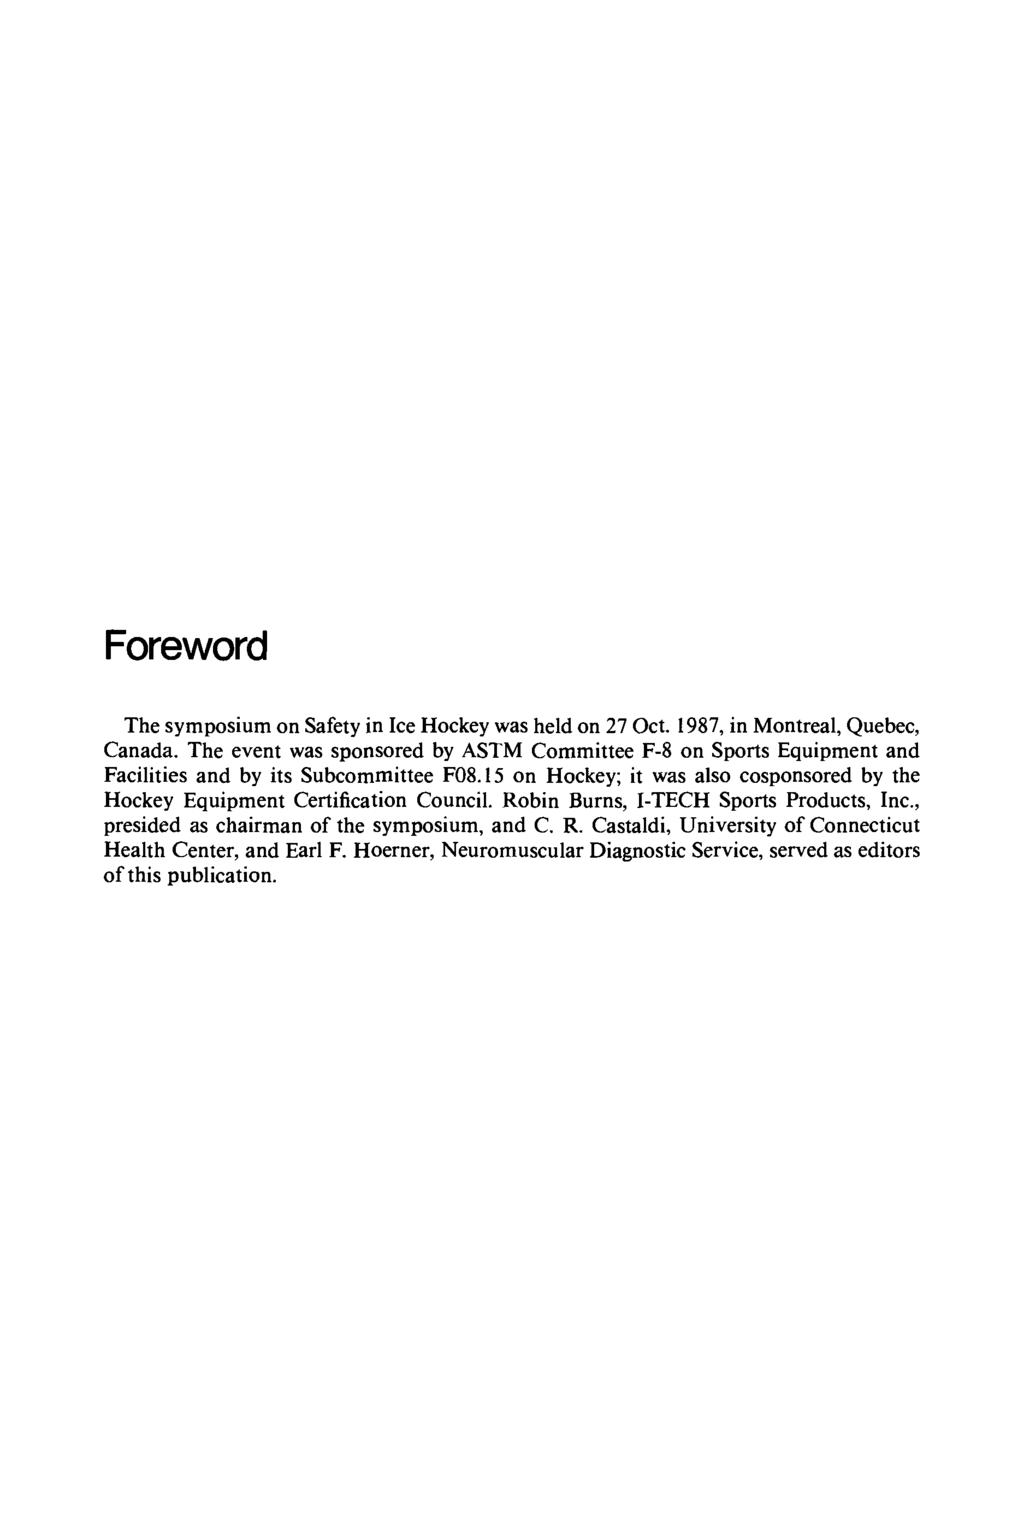 Foreword The symposium on Safety in Ice Hockey was held on 27 Oct. 1987, in Montreal, Quebec, Canada.